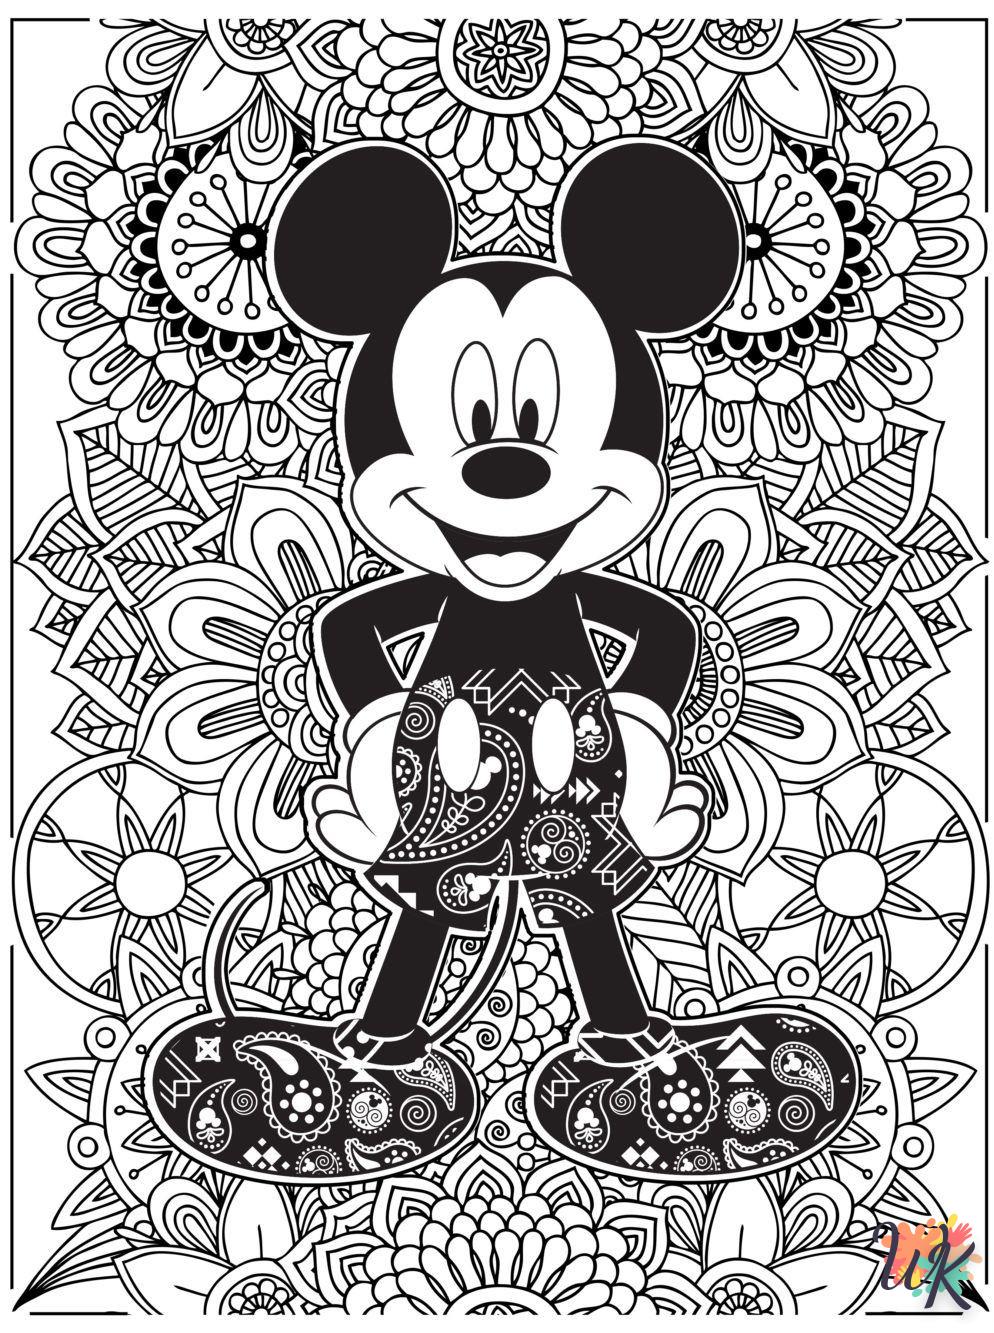 Disney Difficult coloring pages free